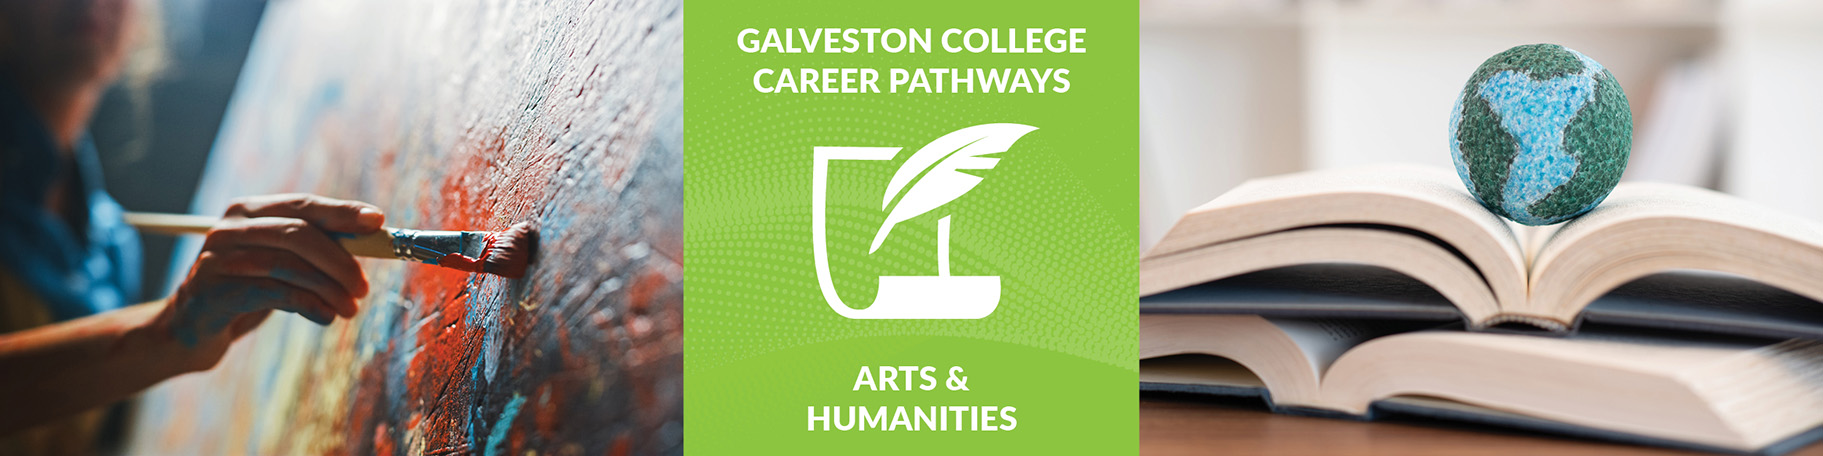 GC Arts and Humanities Pathway